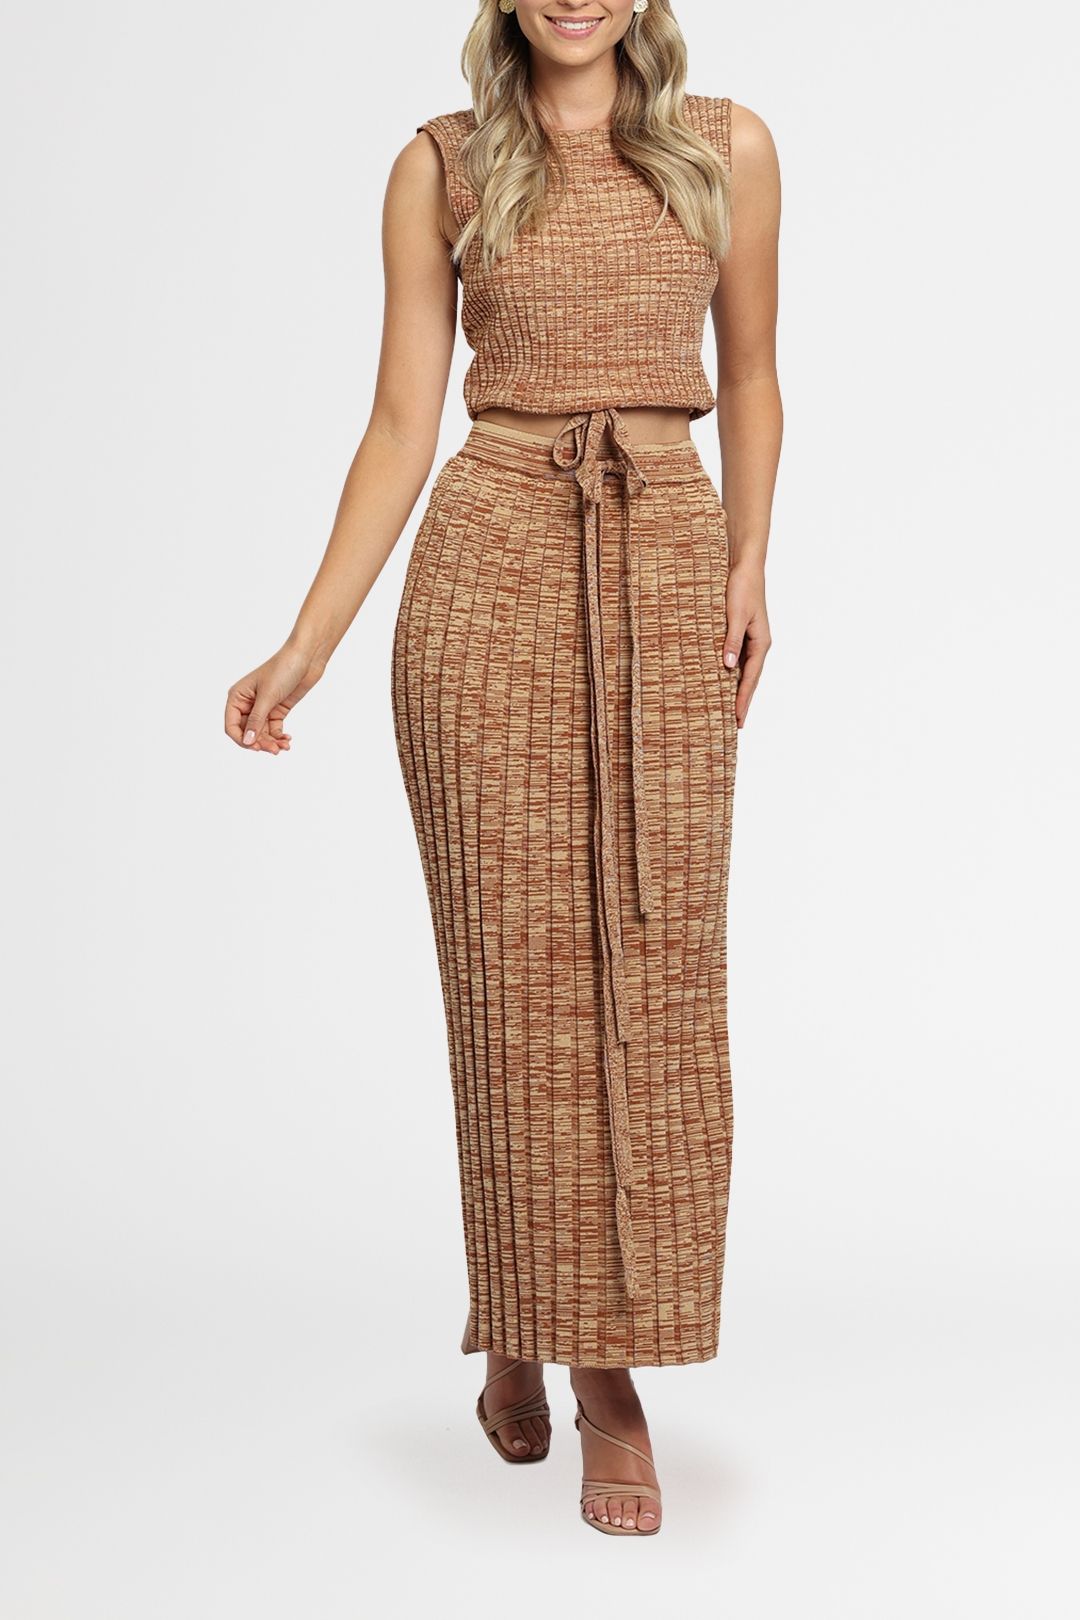 Ministry of Style Retrospective Knit Top and Skirt Set Copper bodycon